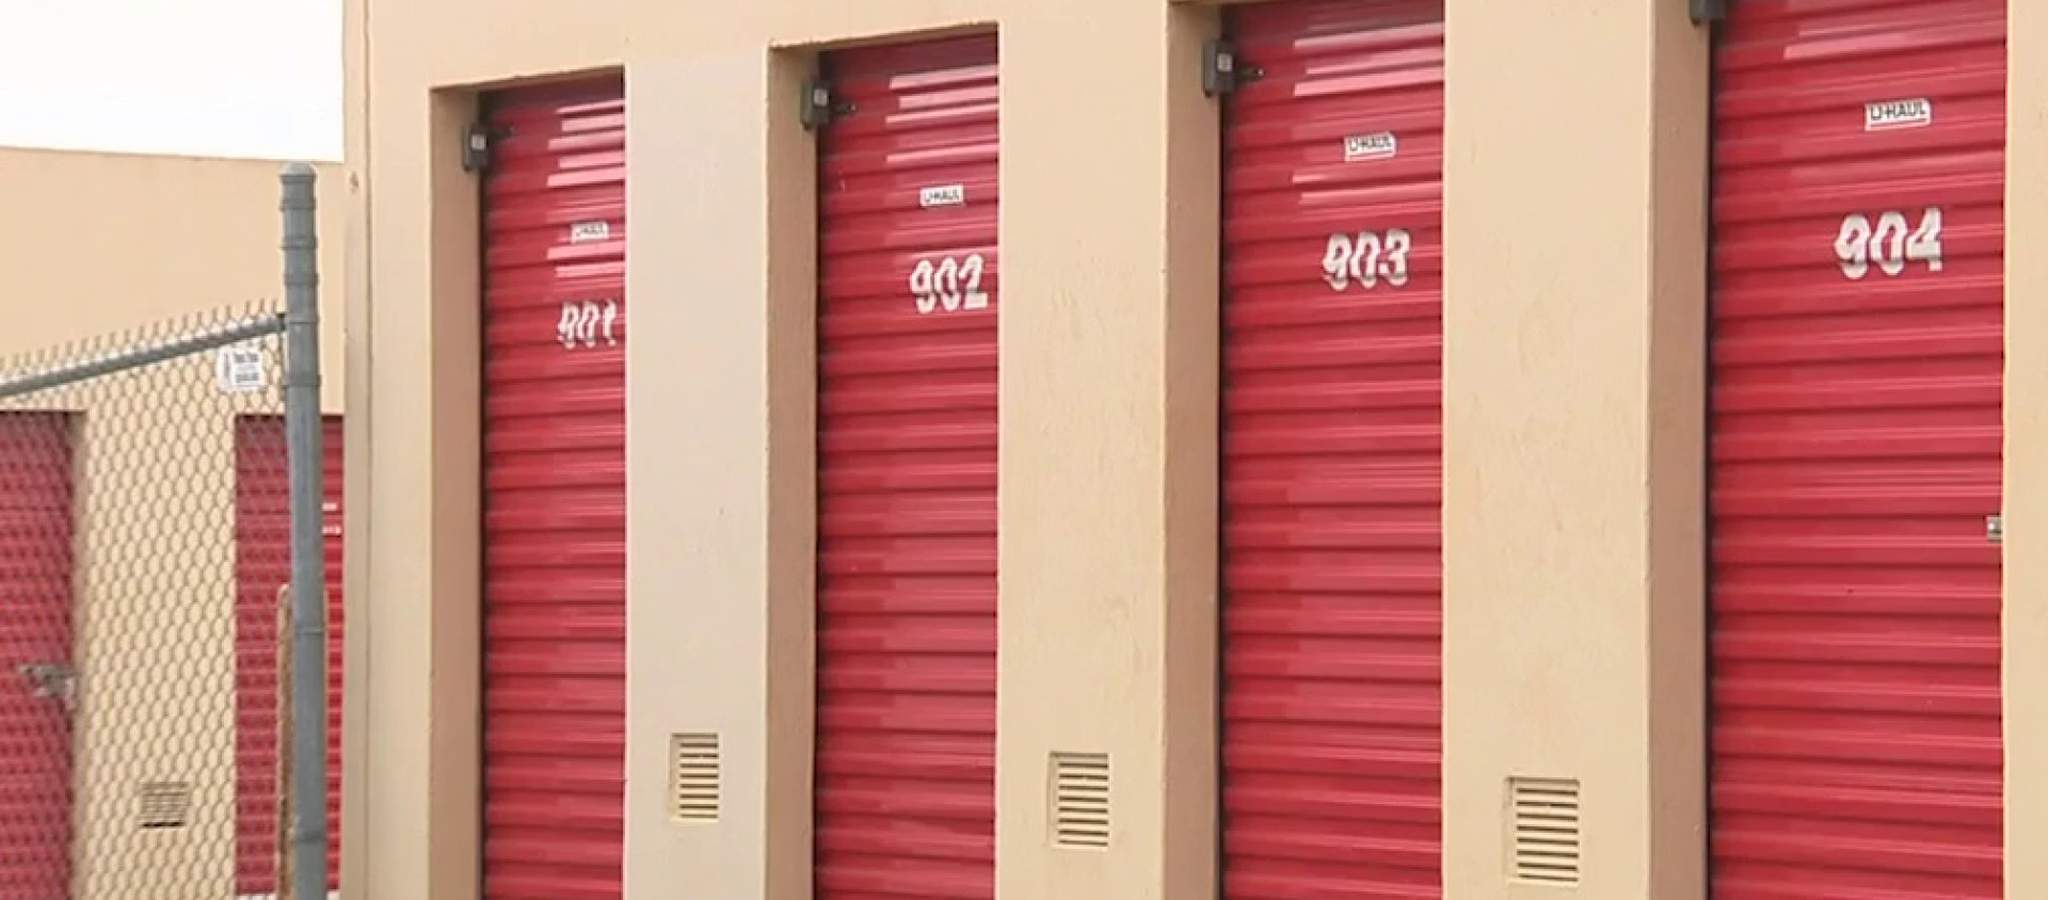 Seguin police recover thousands in merchandise stolen from storage units